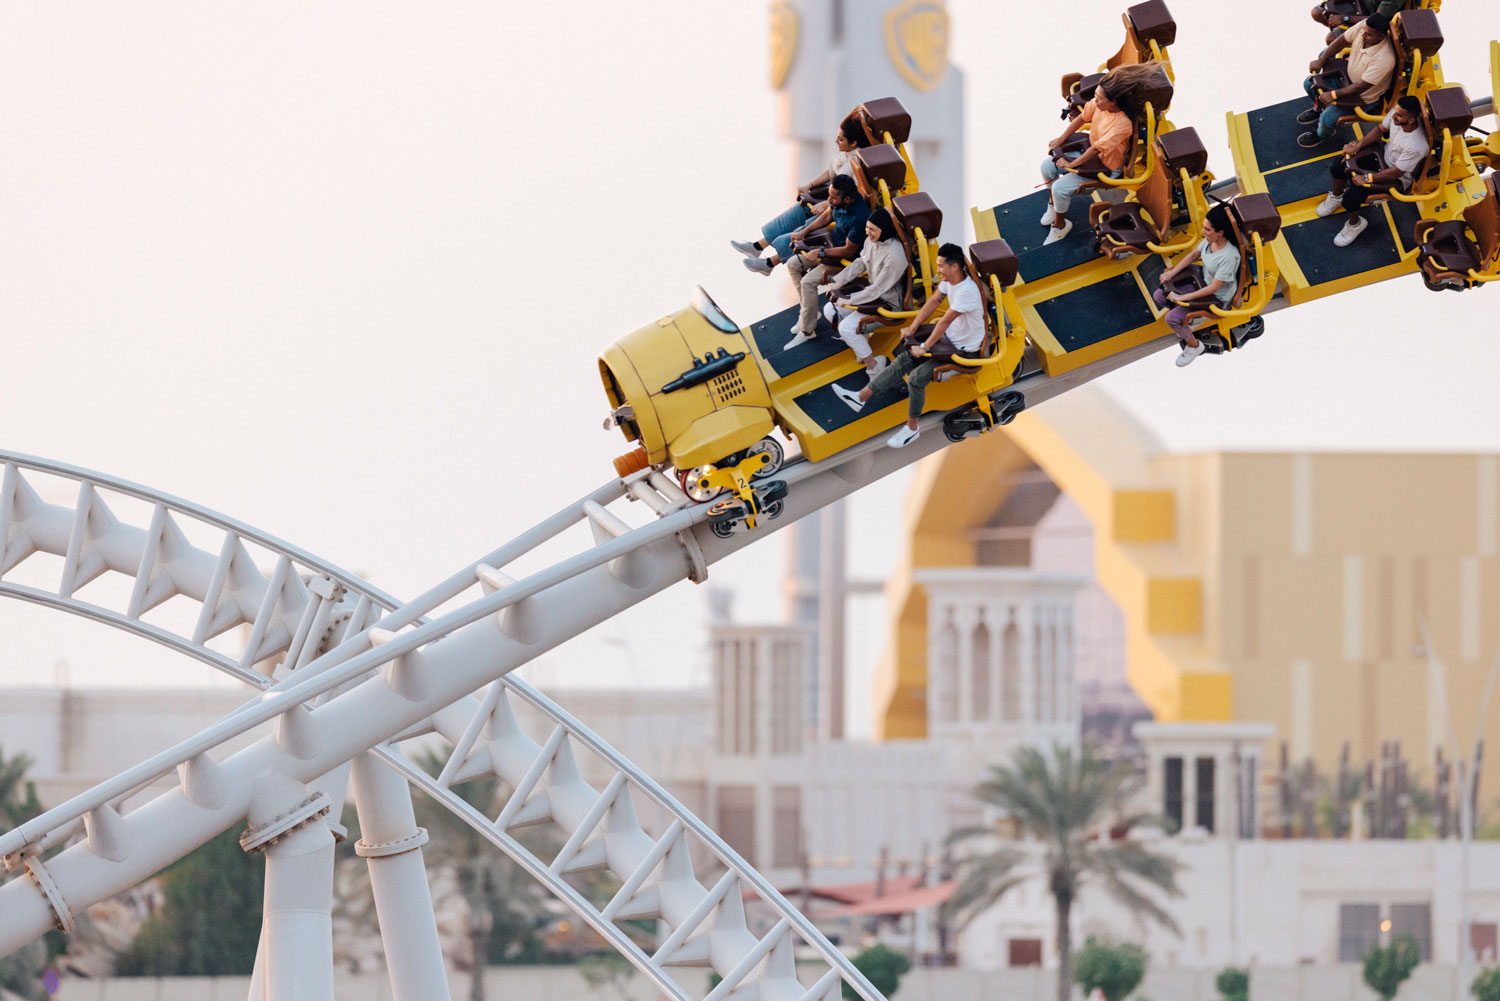 Ride record-breaking rollercoasters